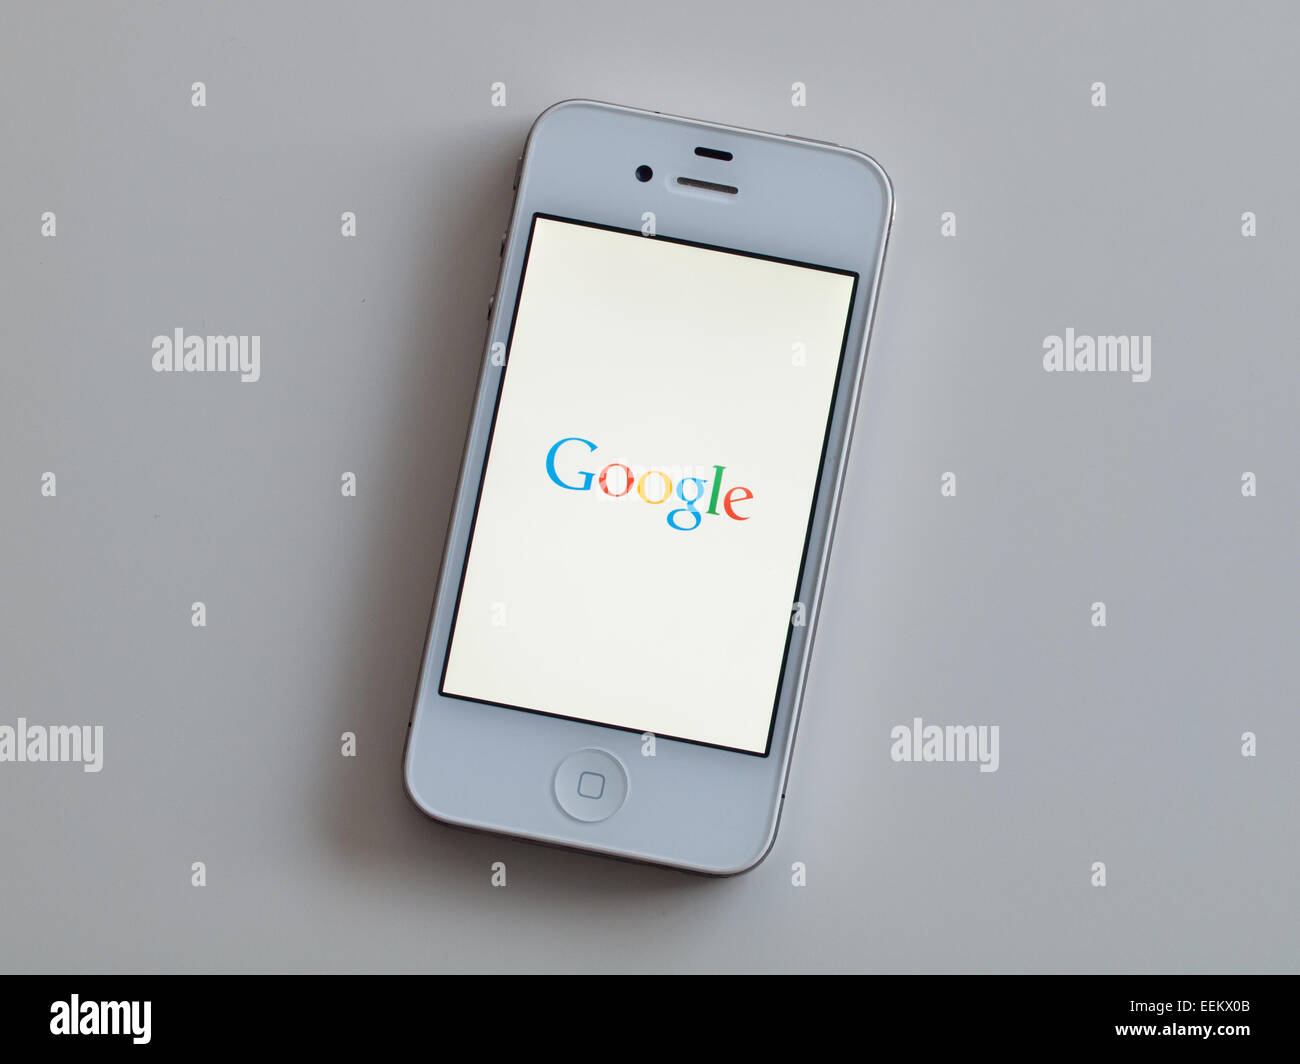 A view of the homescreen of the Google Search app on a white Apple iPhone 4. Stock Photo